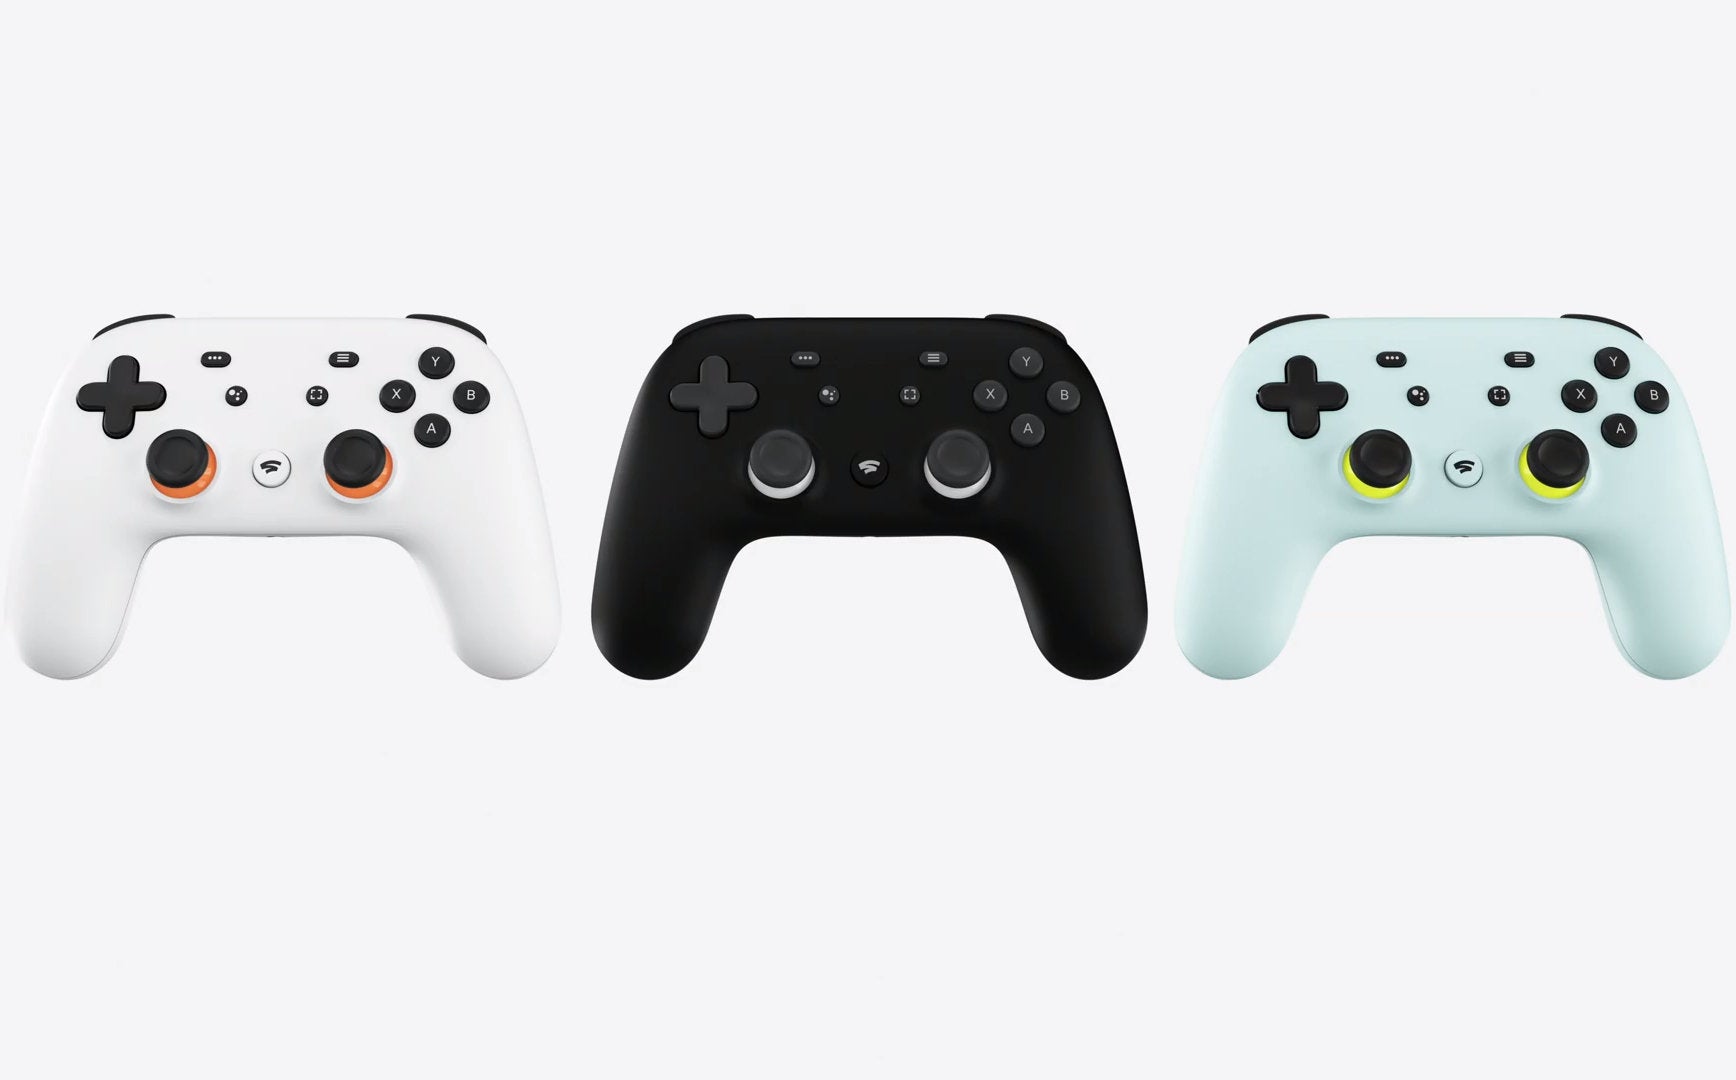 The Stadia controller - Google's new Stadia service allows users to play video games on the go (yes, on smartphones)